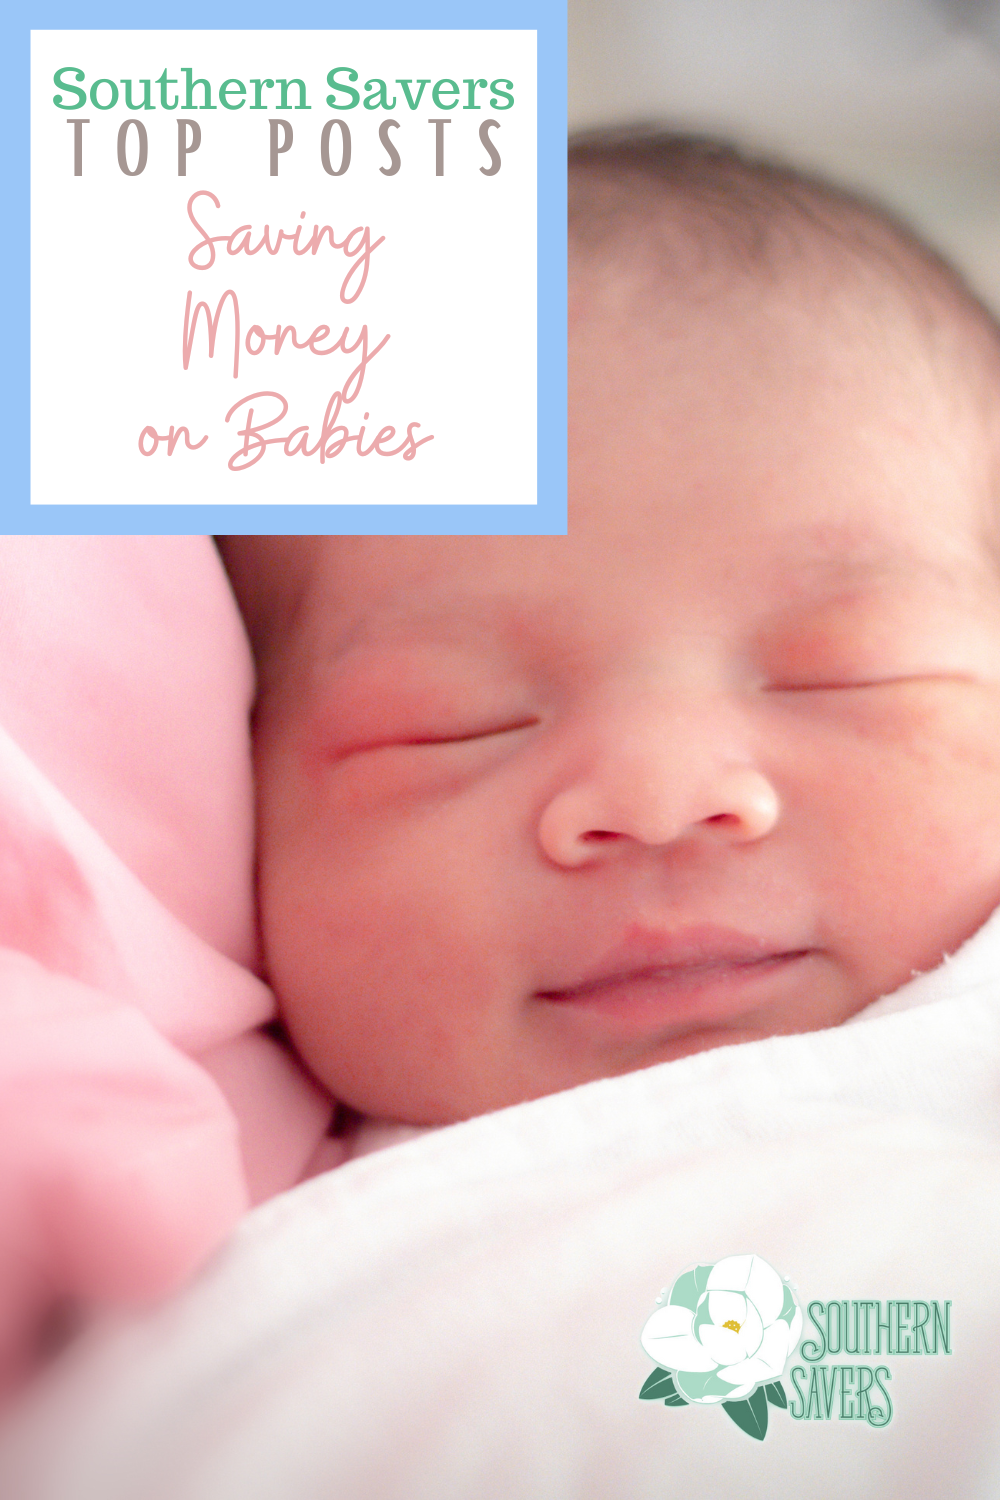 Babies need a lot of things, but children are a blessing and don't have to be a budget drain. Here are our top posts all about babies and saving money!